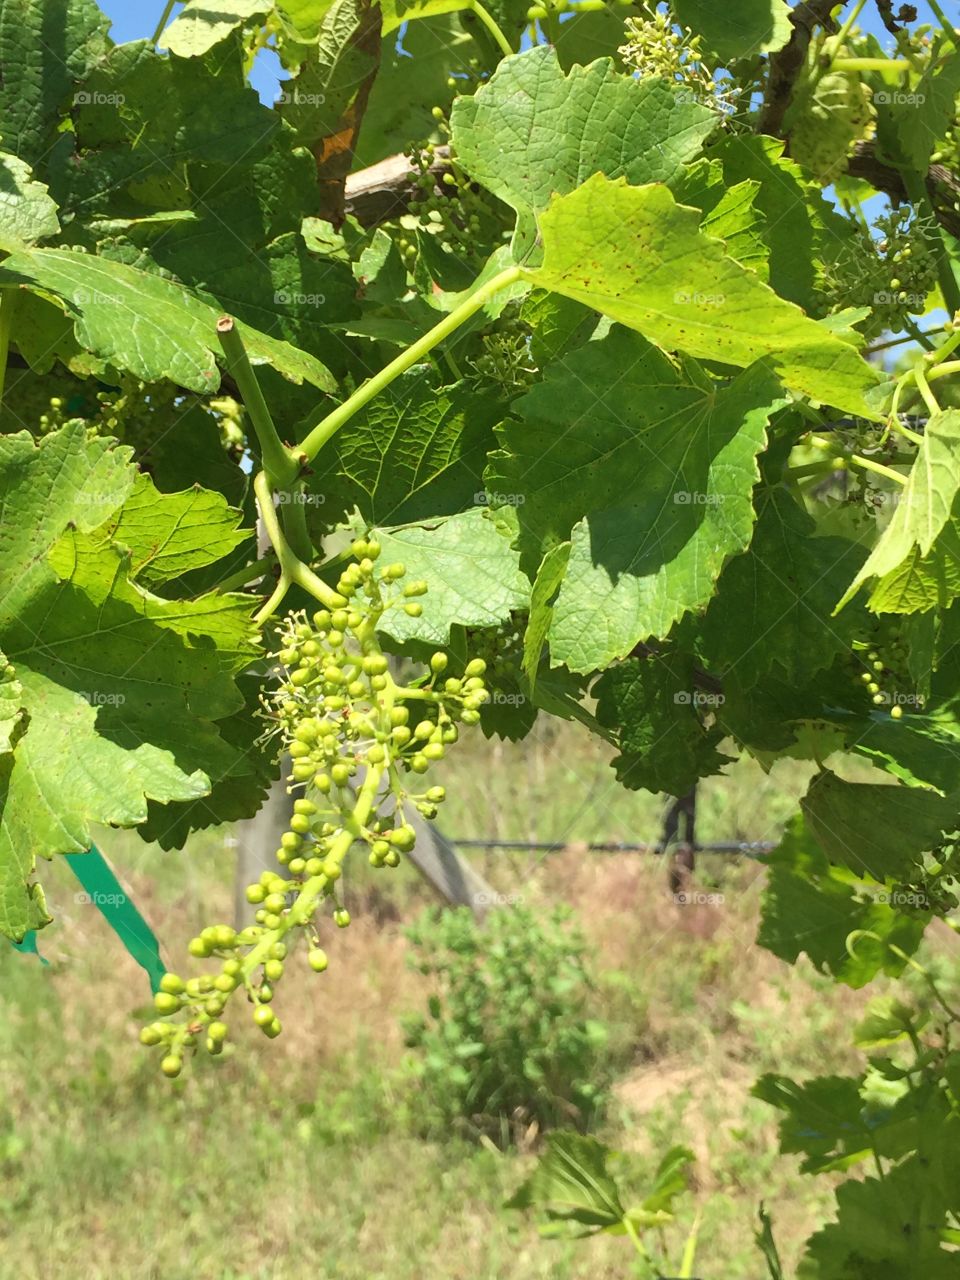 Baby grapes on a vine